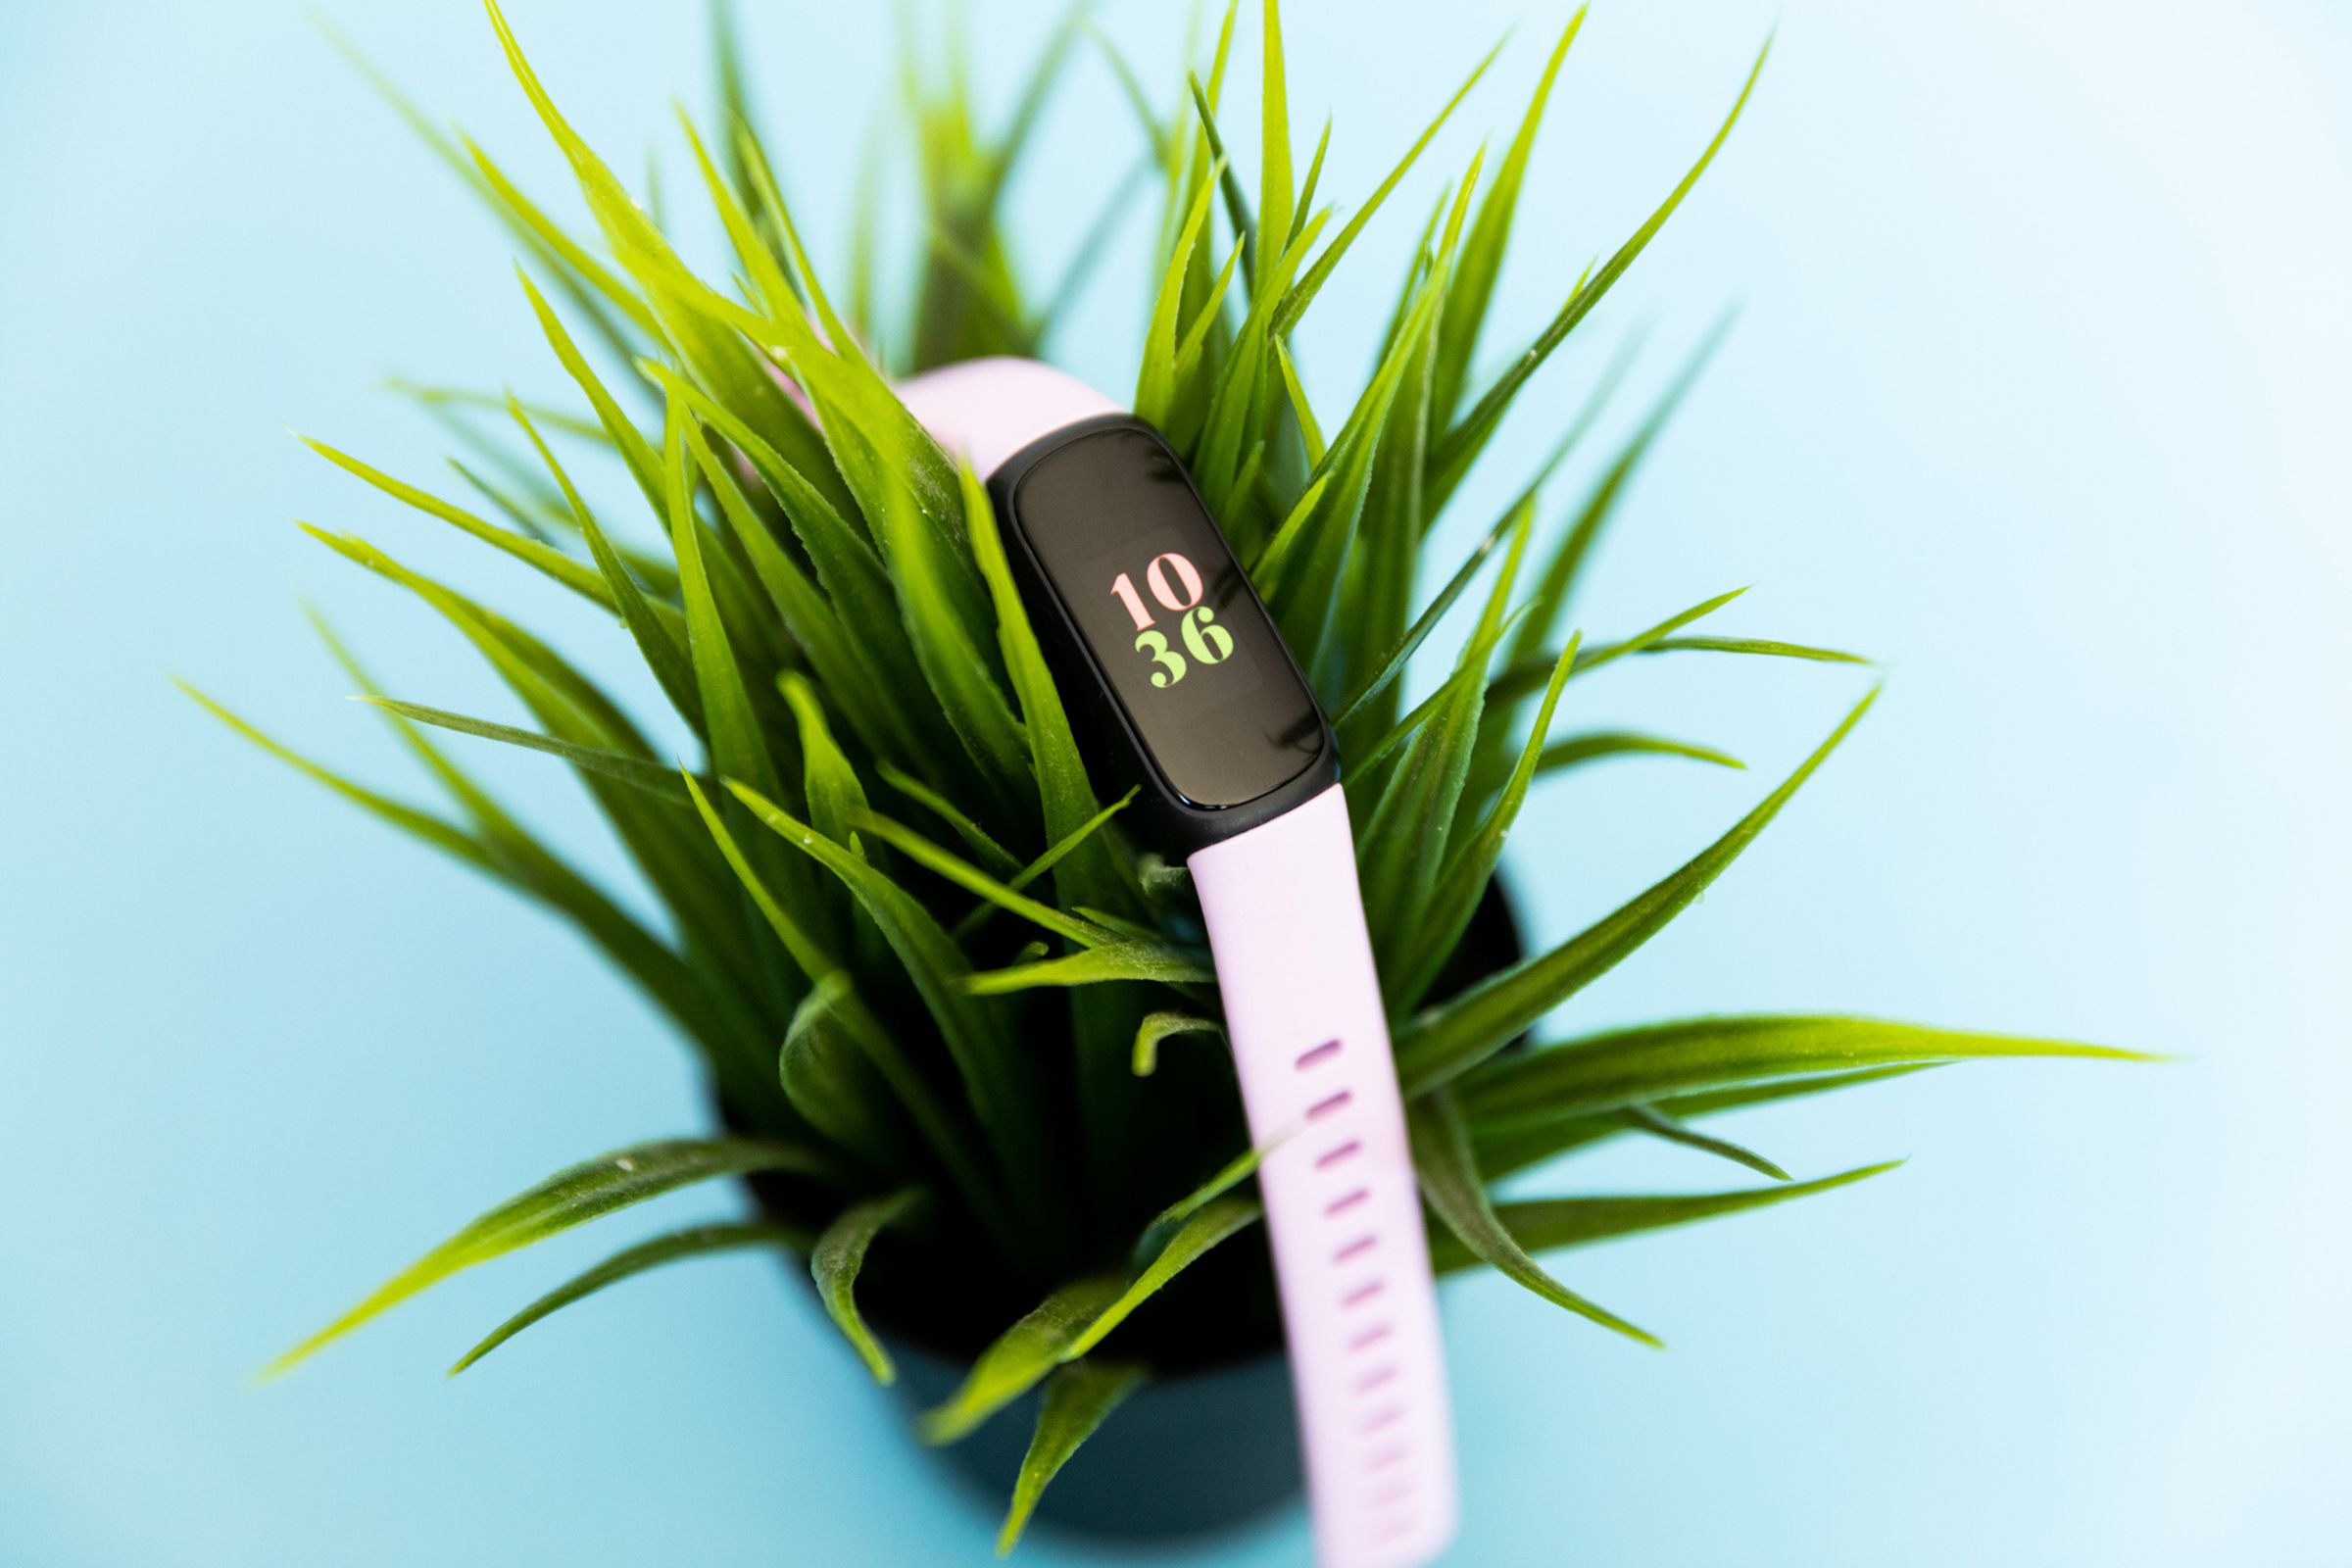 The Fitbit Inspire 3 on top of a plant